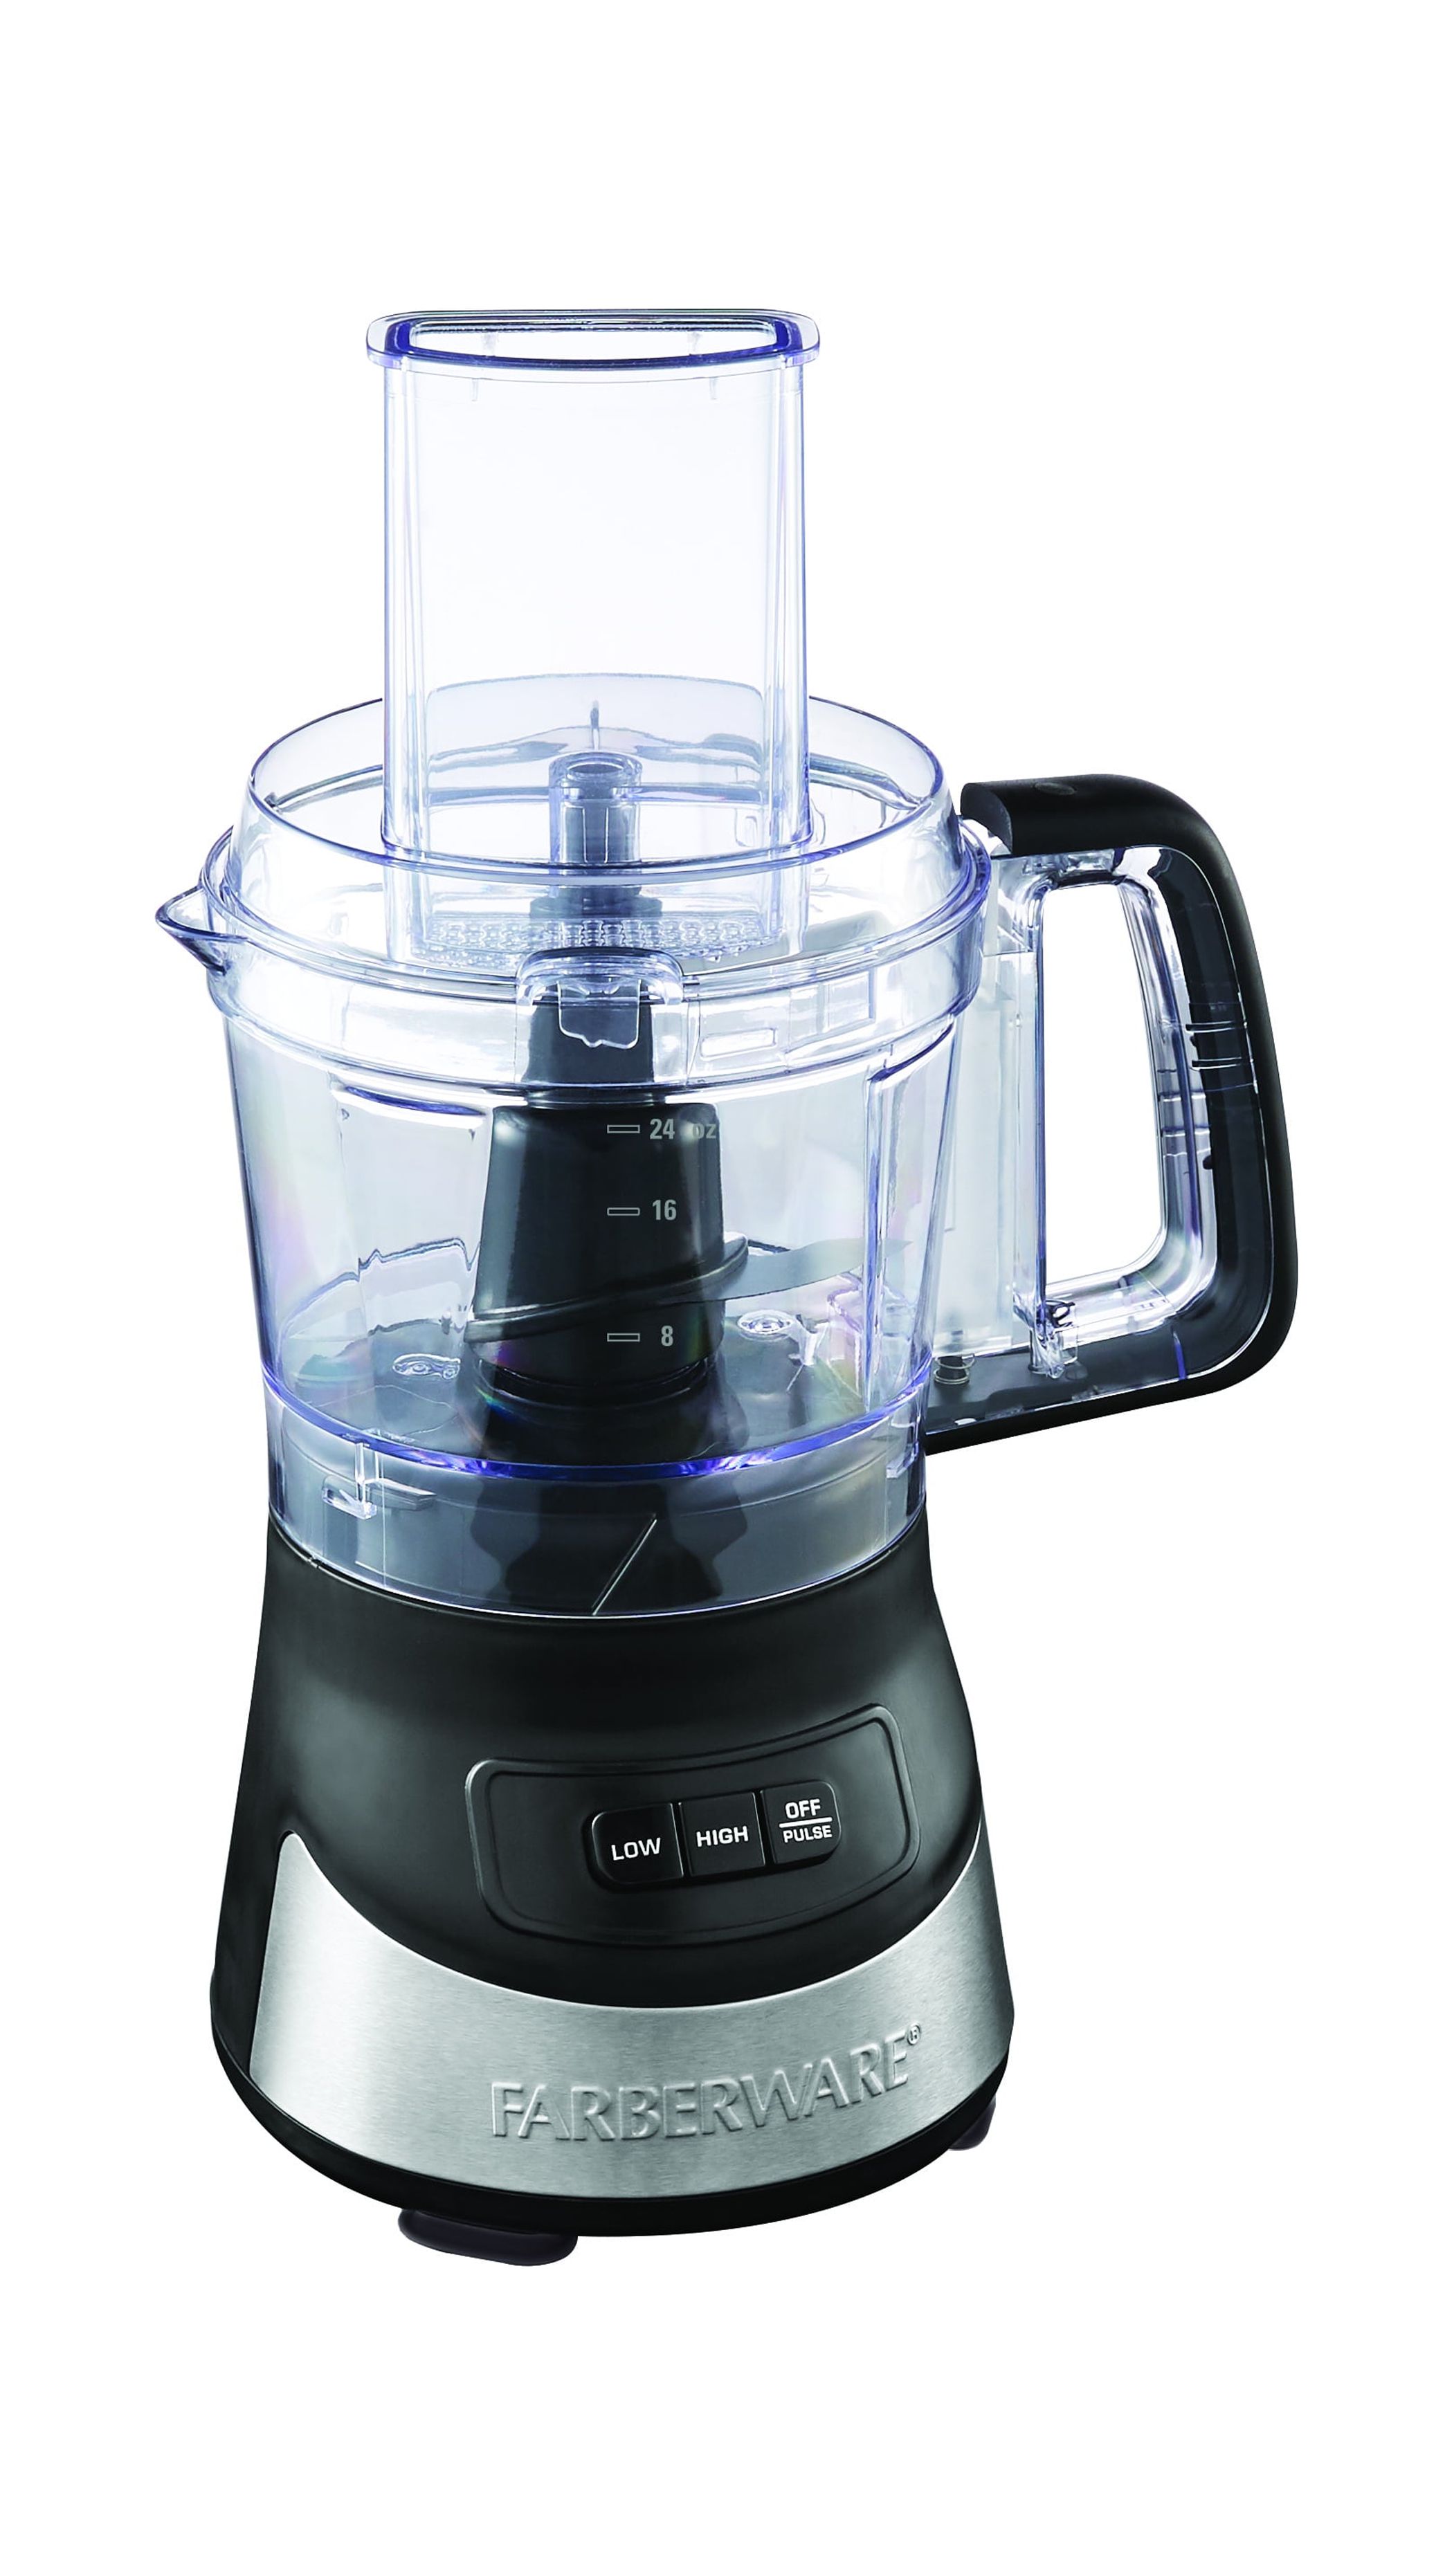 Farberware 4 Cup Food Processor with Stainless Steel Blade - image 5 of 5